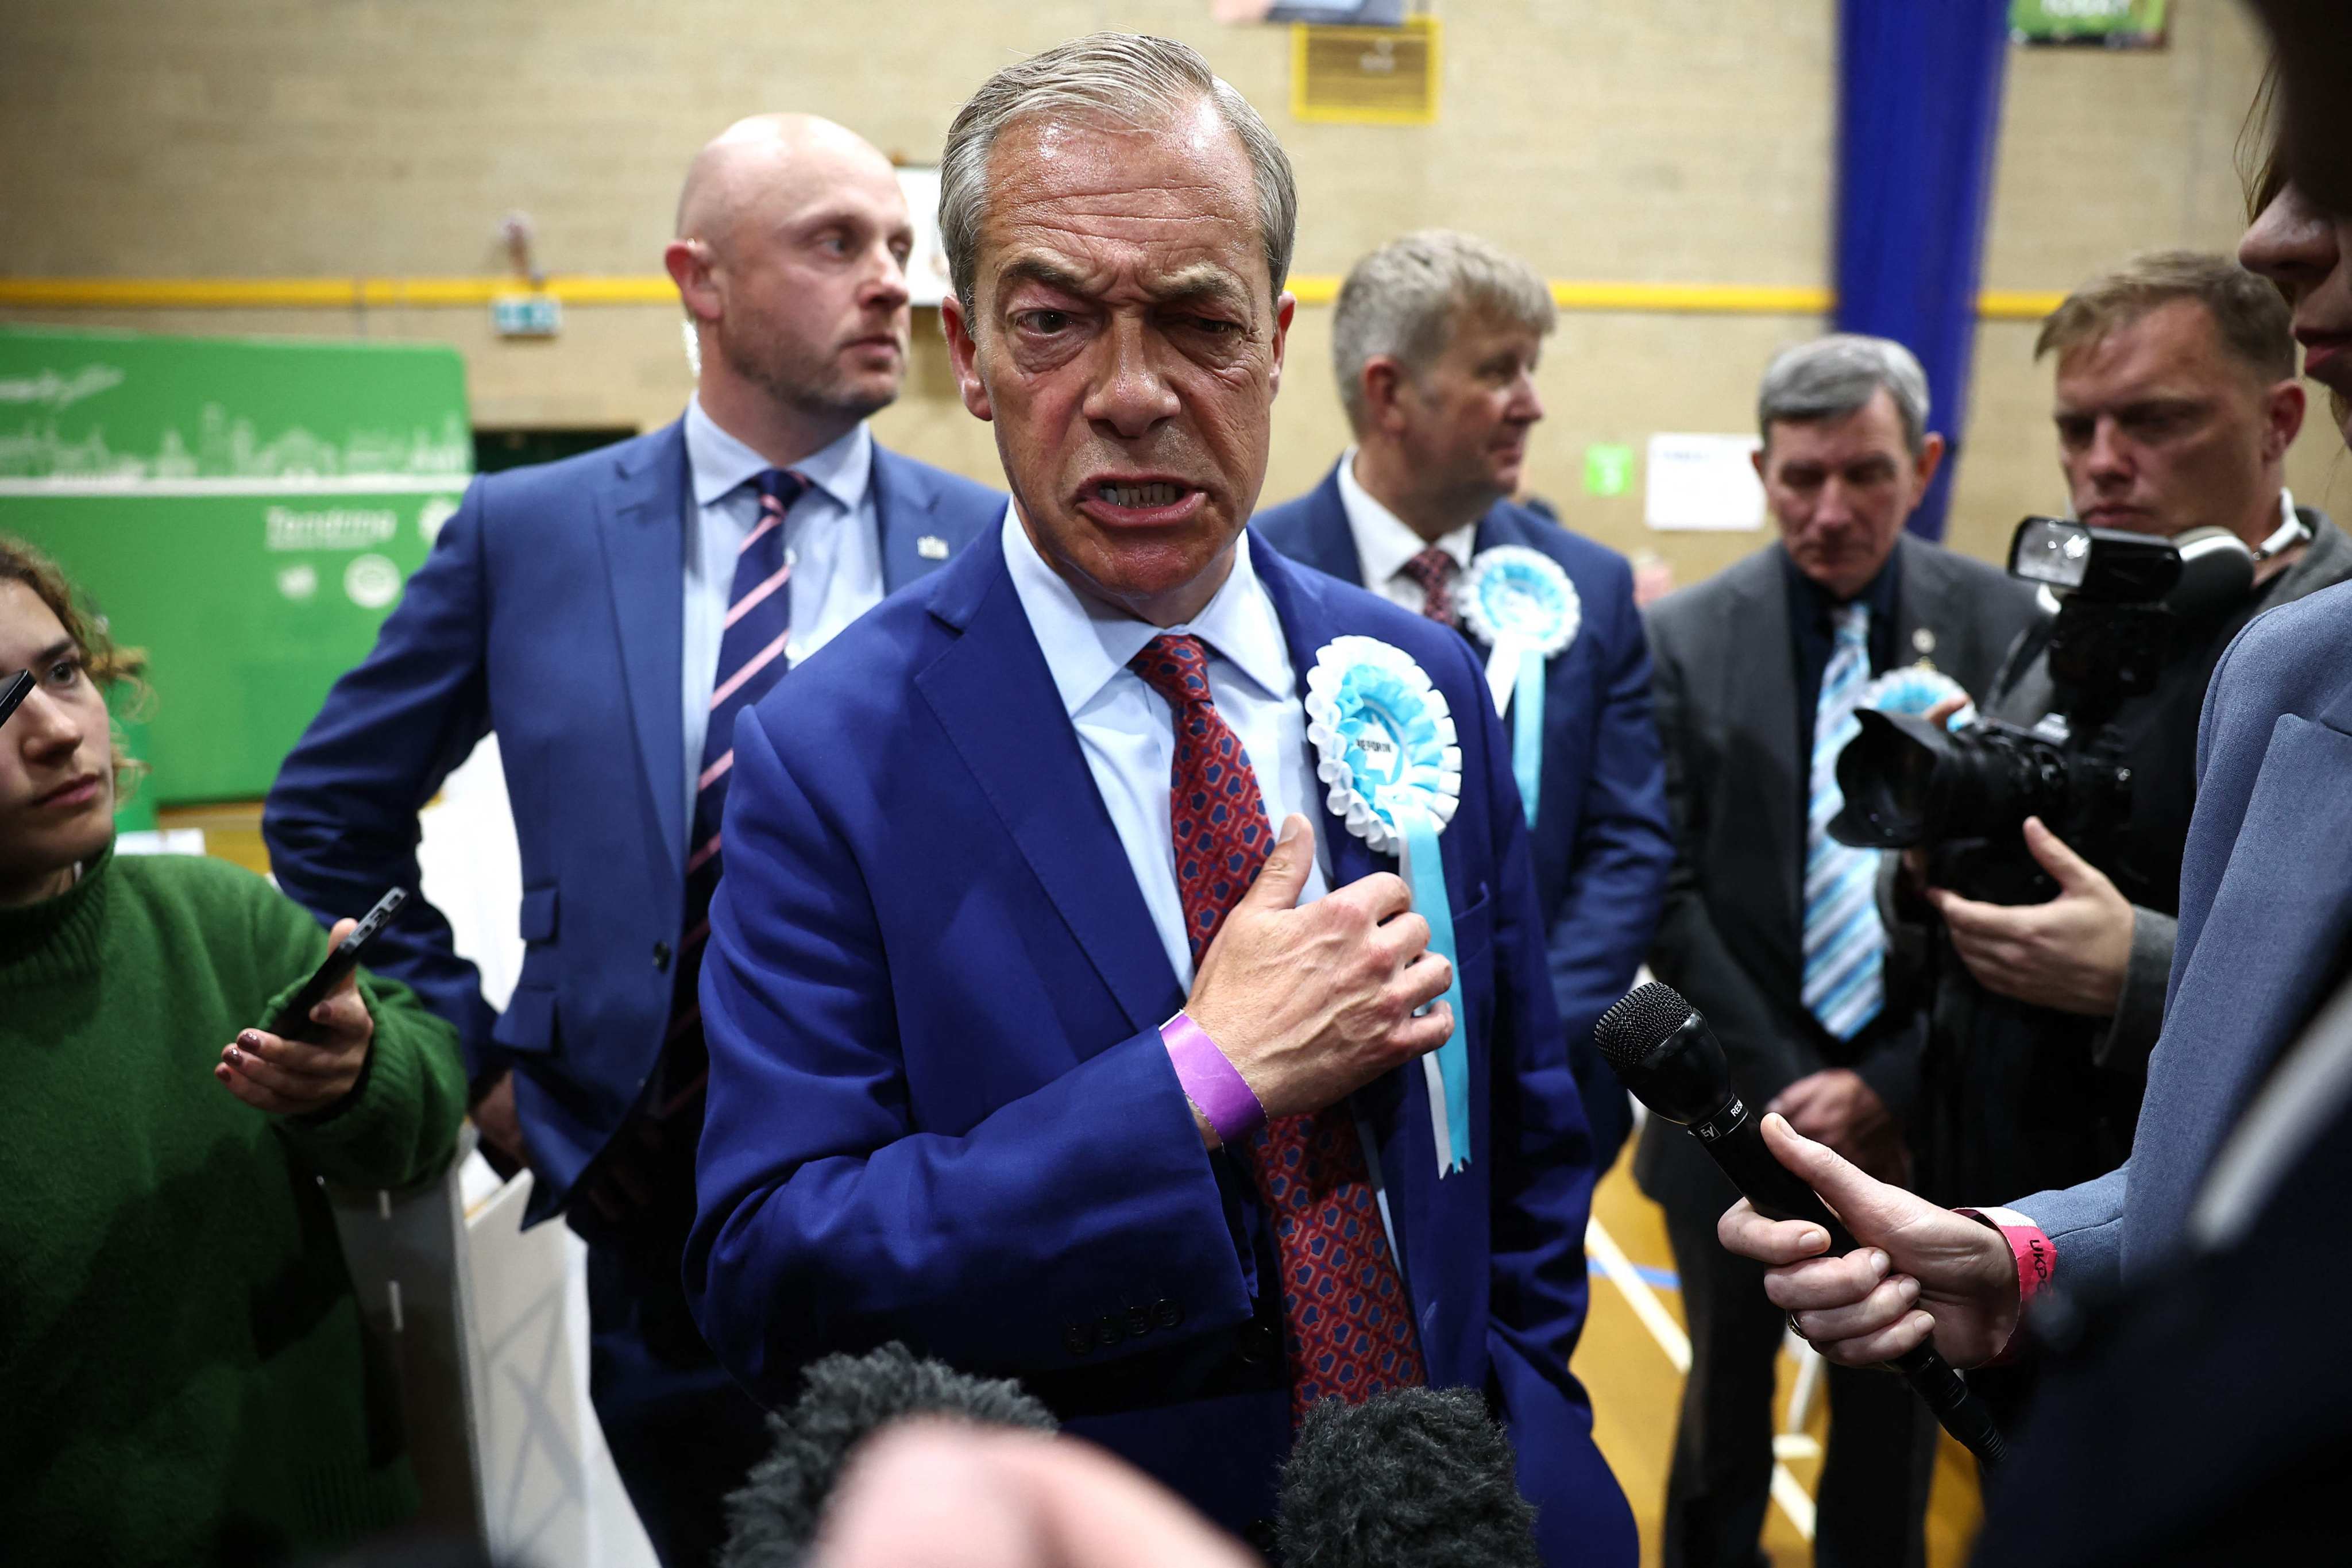 Nigel Farage after being elected to become MP on Thursday. Photo: AFP